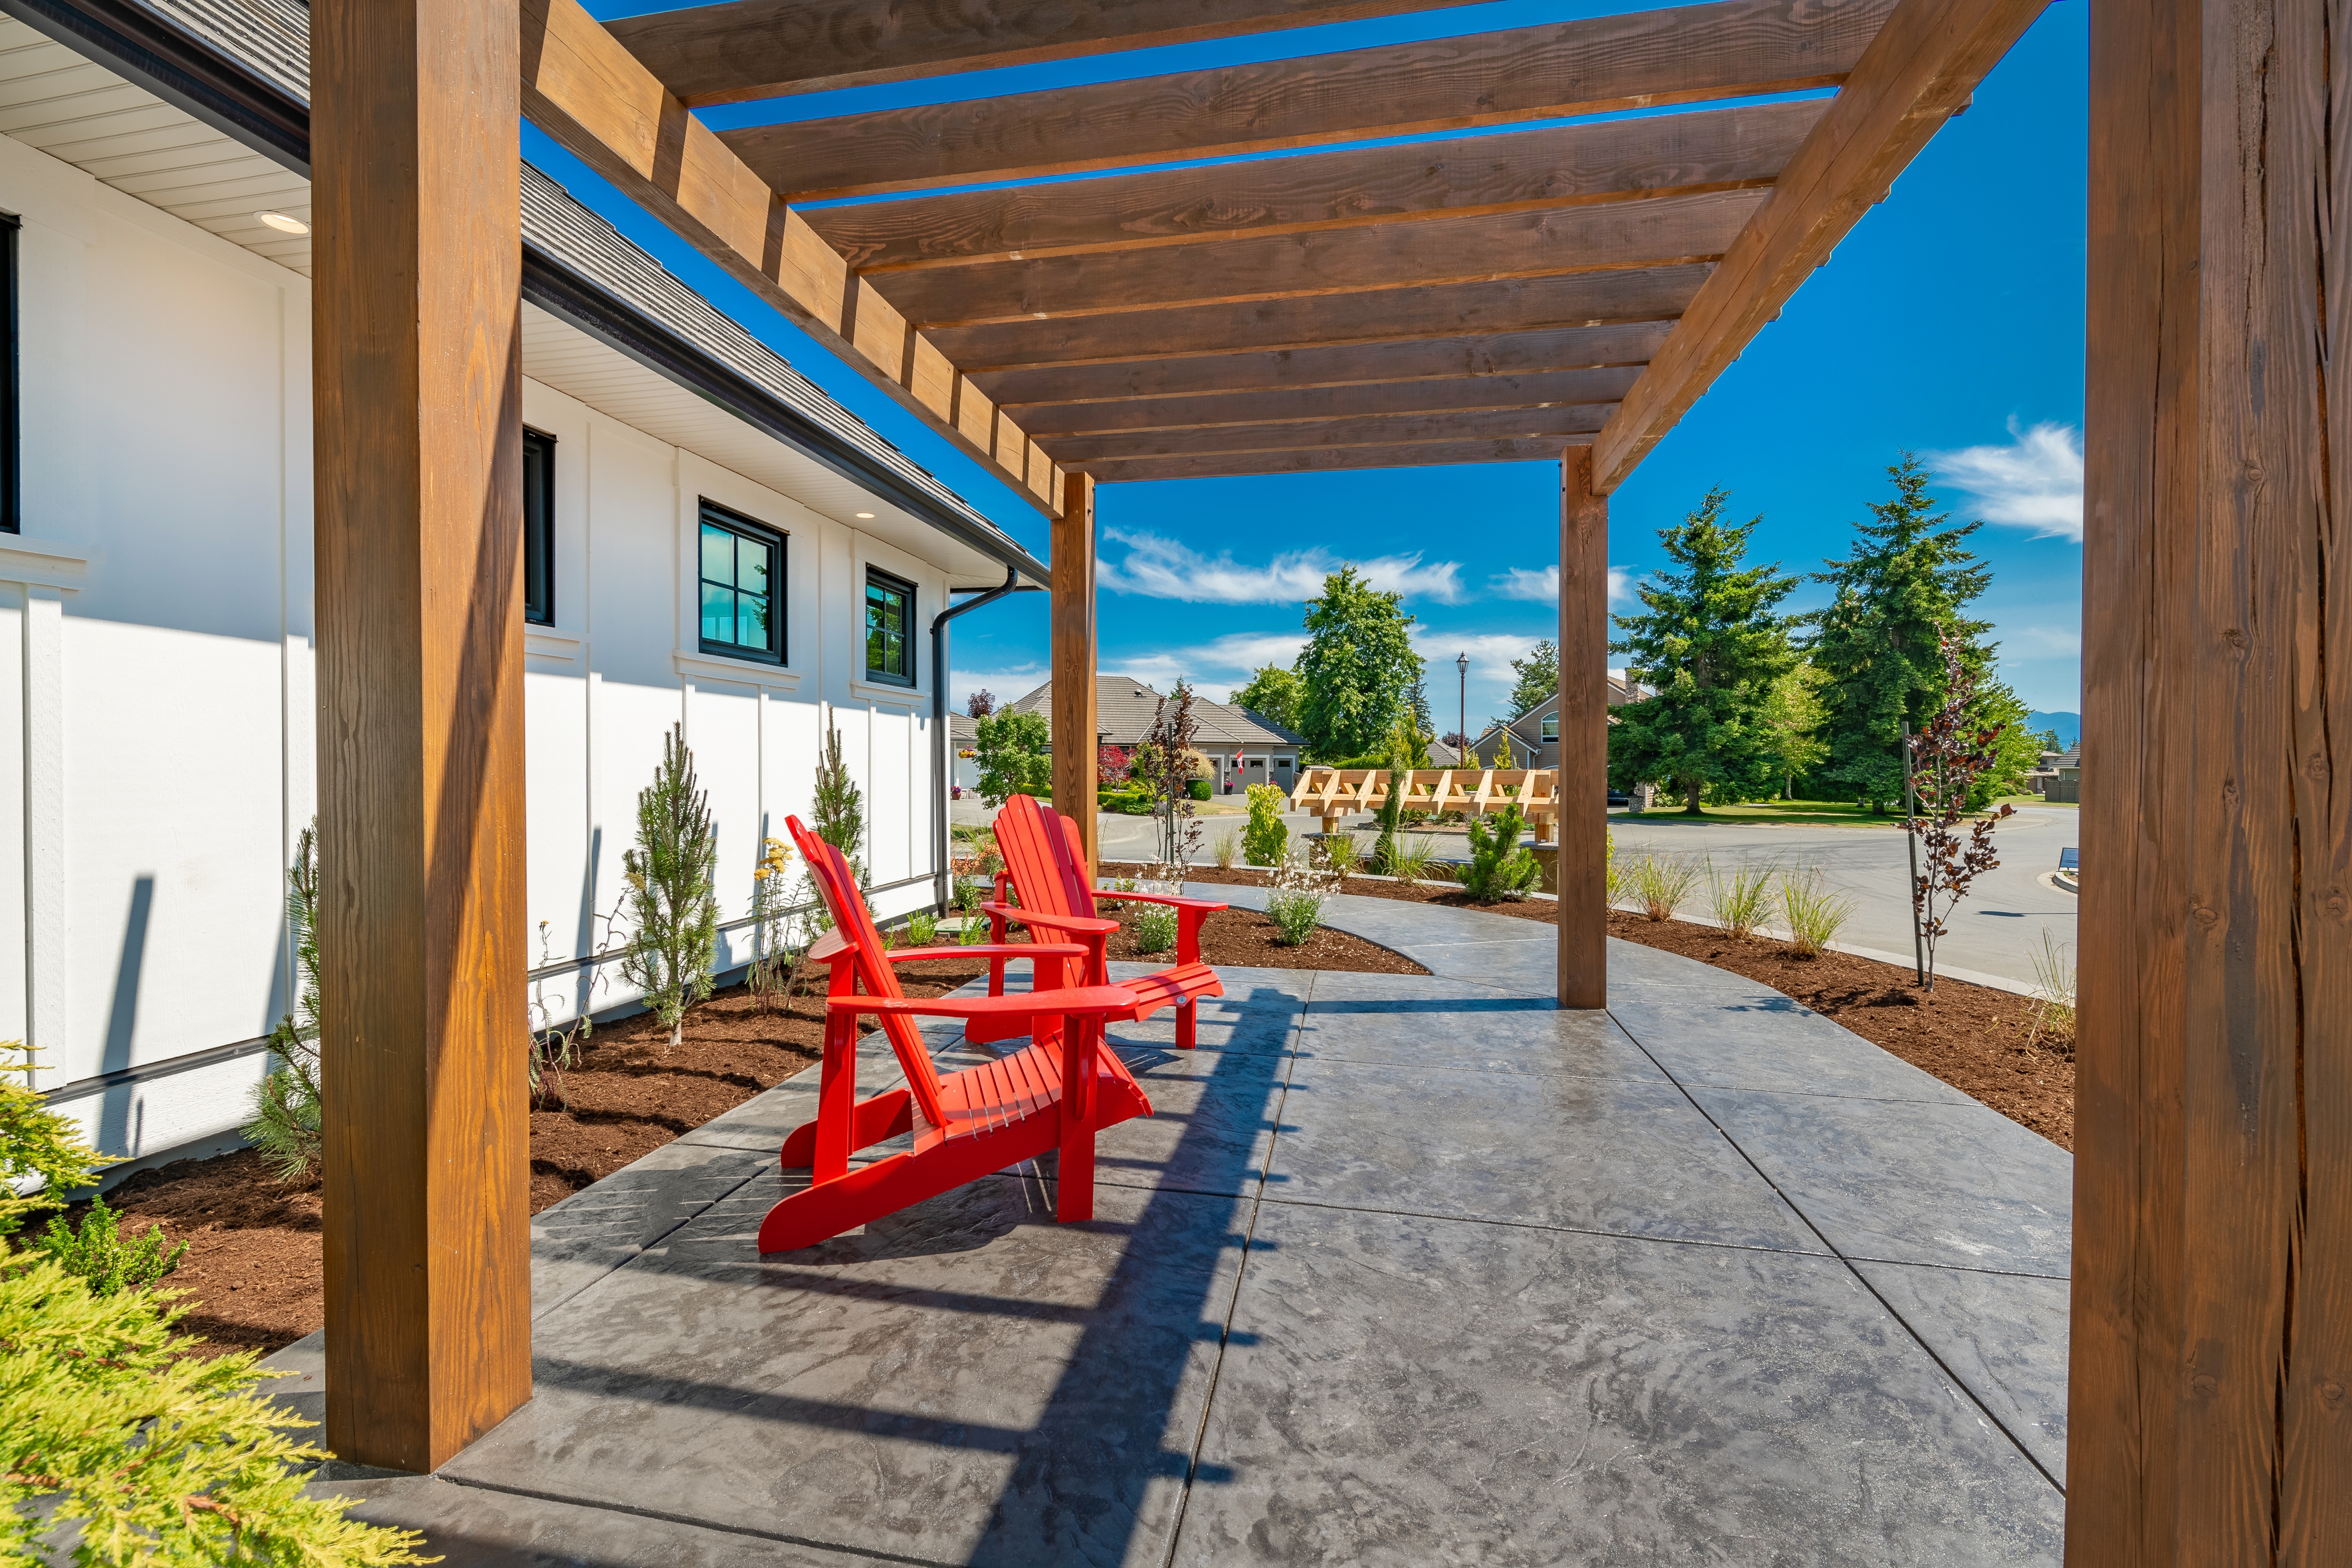 A patio with a pergola features stamped concrete and two wooden red chairs. | Source: Shutterstock